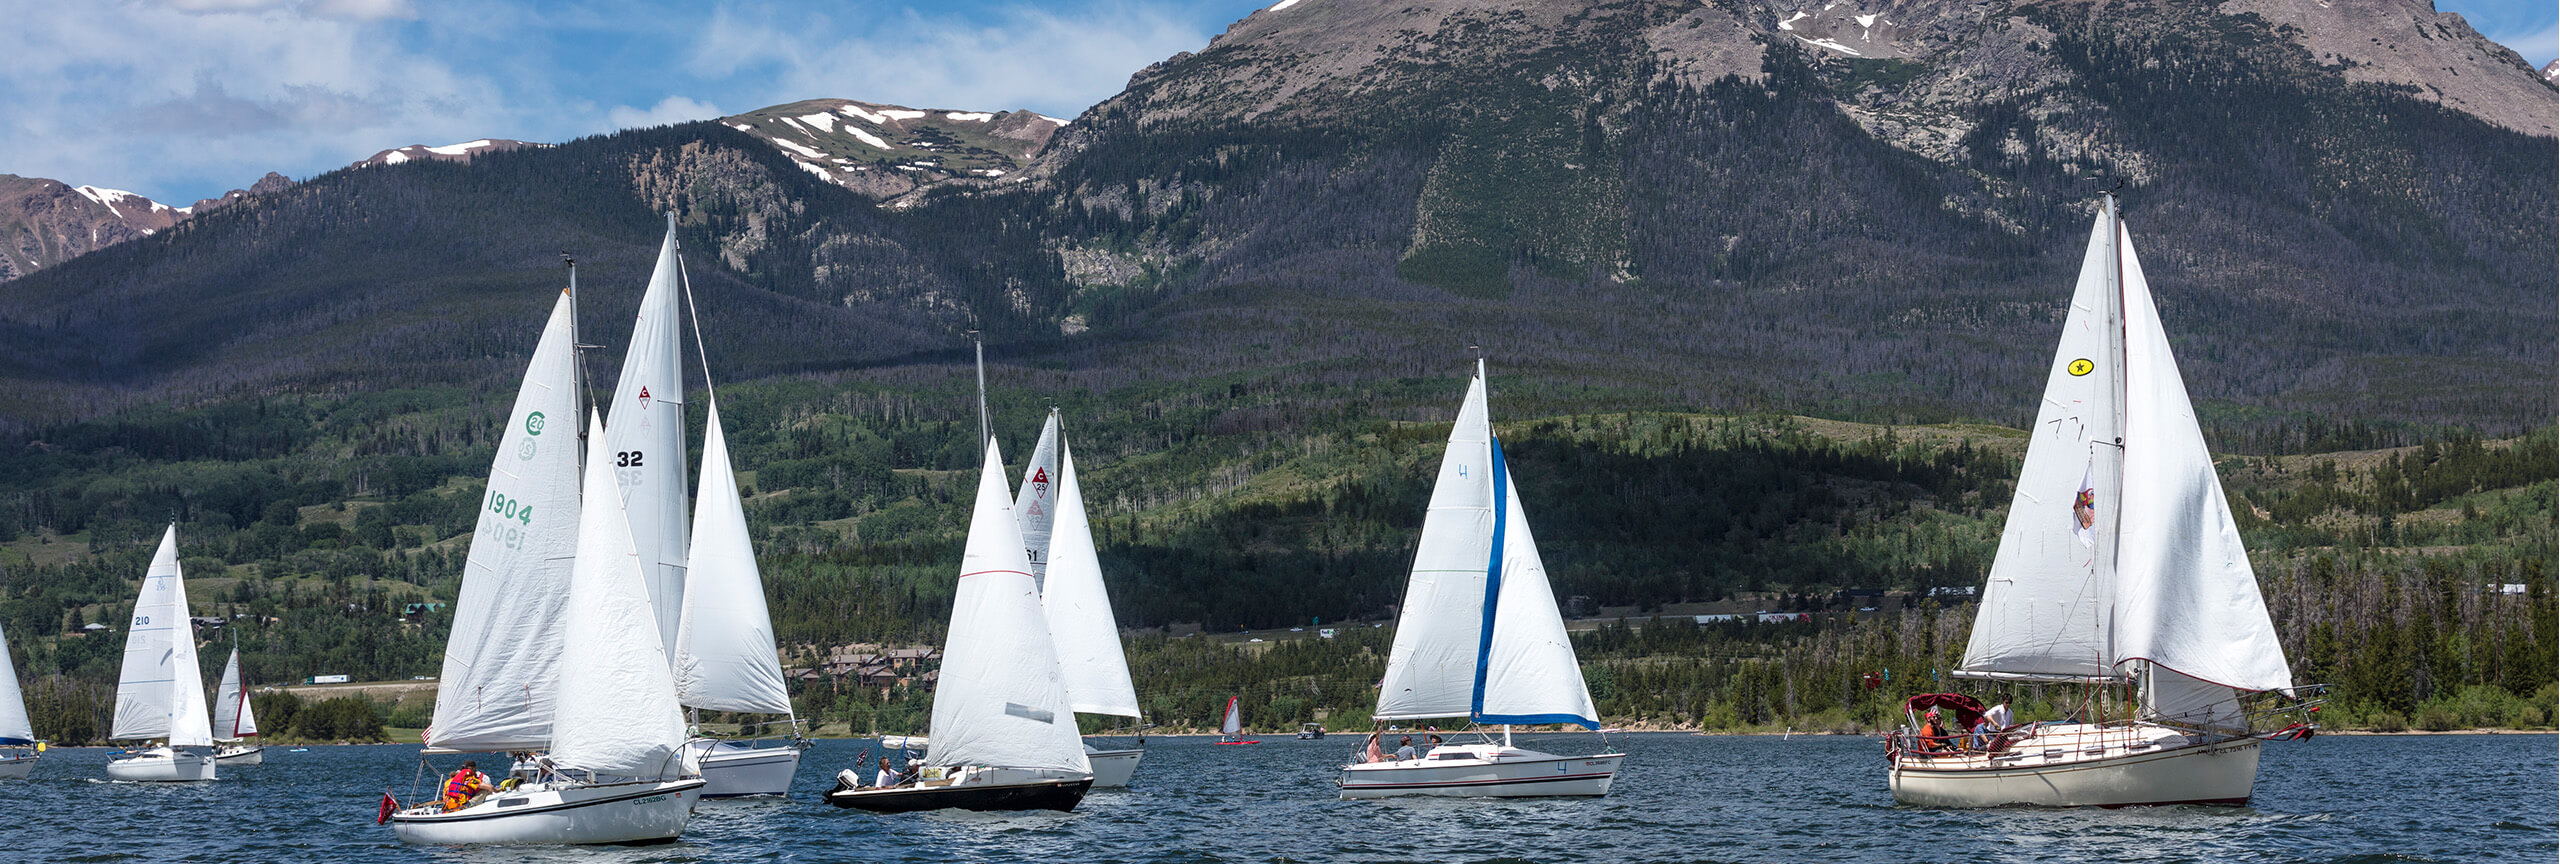 Sail boats during the Timberline Cruiser Regatta in the Dillon Reservoir with Buffalo Mountain in the background